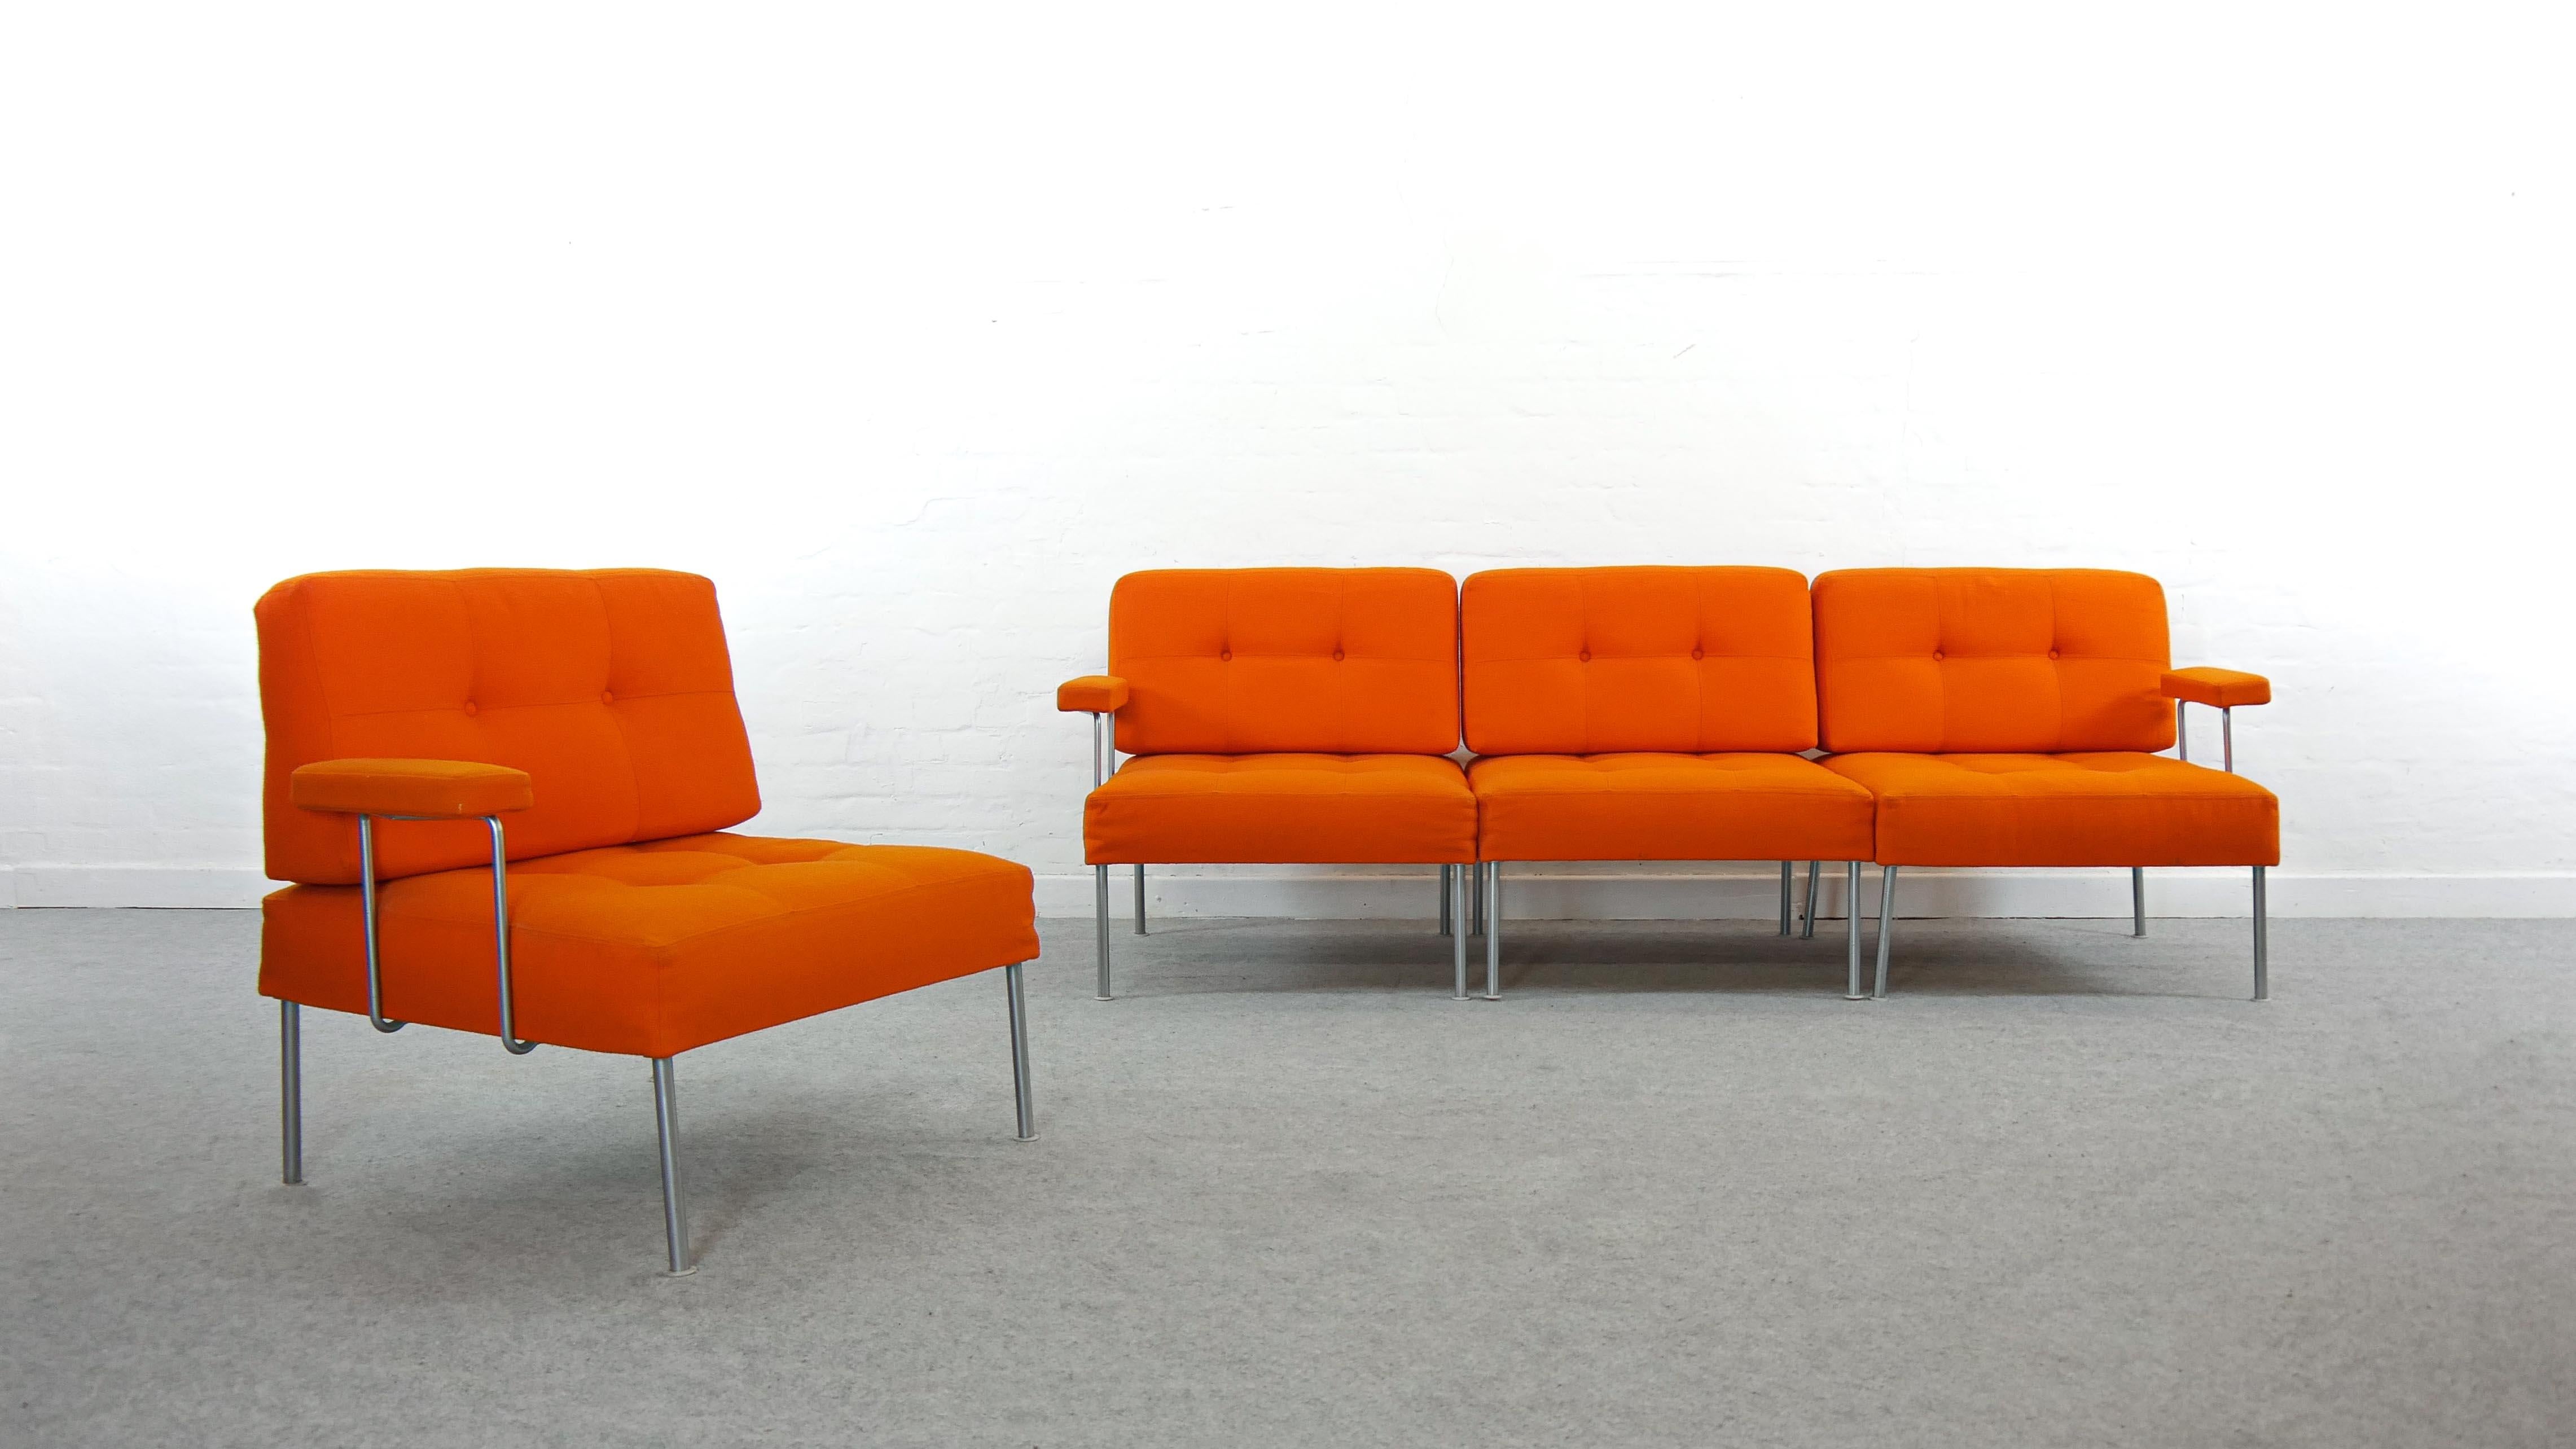 Modular sofa designed by Poul Cadovius for France & Son, Denmark.
The sofa consists of 4 seat-elements that can be arranged individually as a sofa or single easy chairs. Comes with 3 interchangeable armrests. Upholstered in its original orange